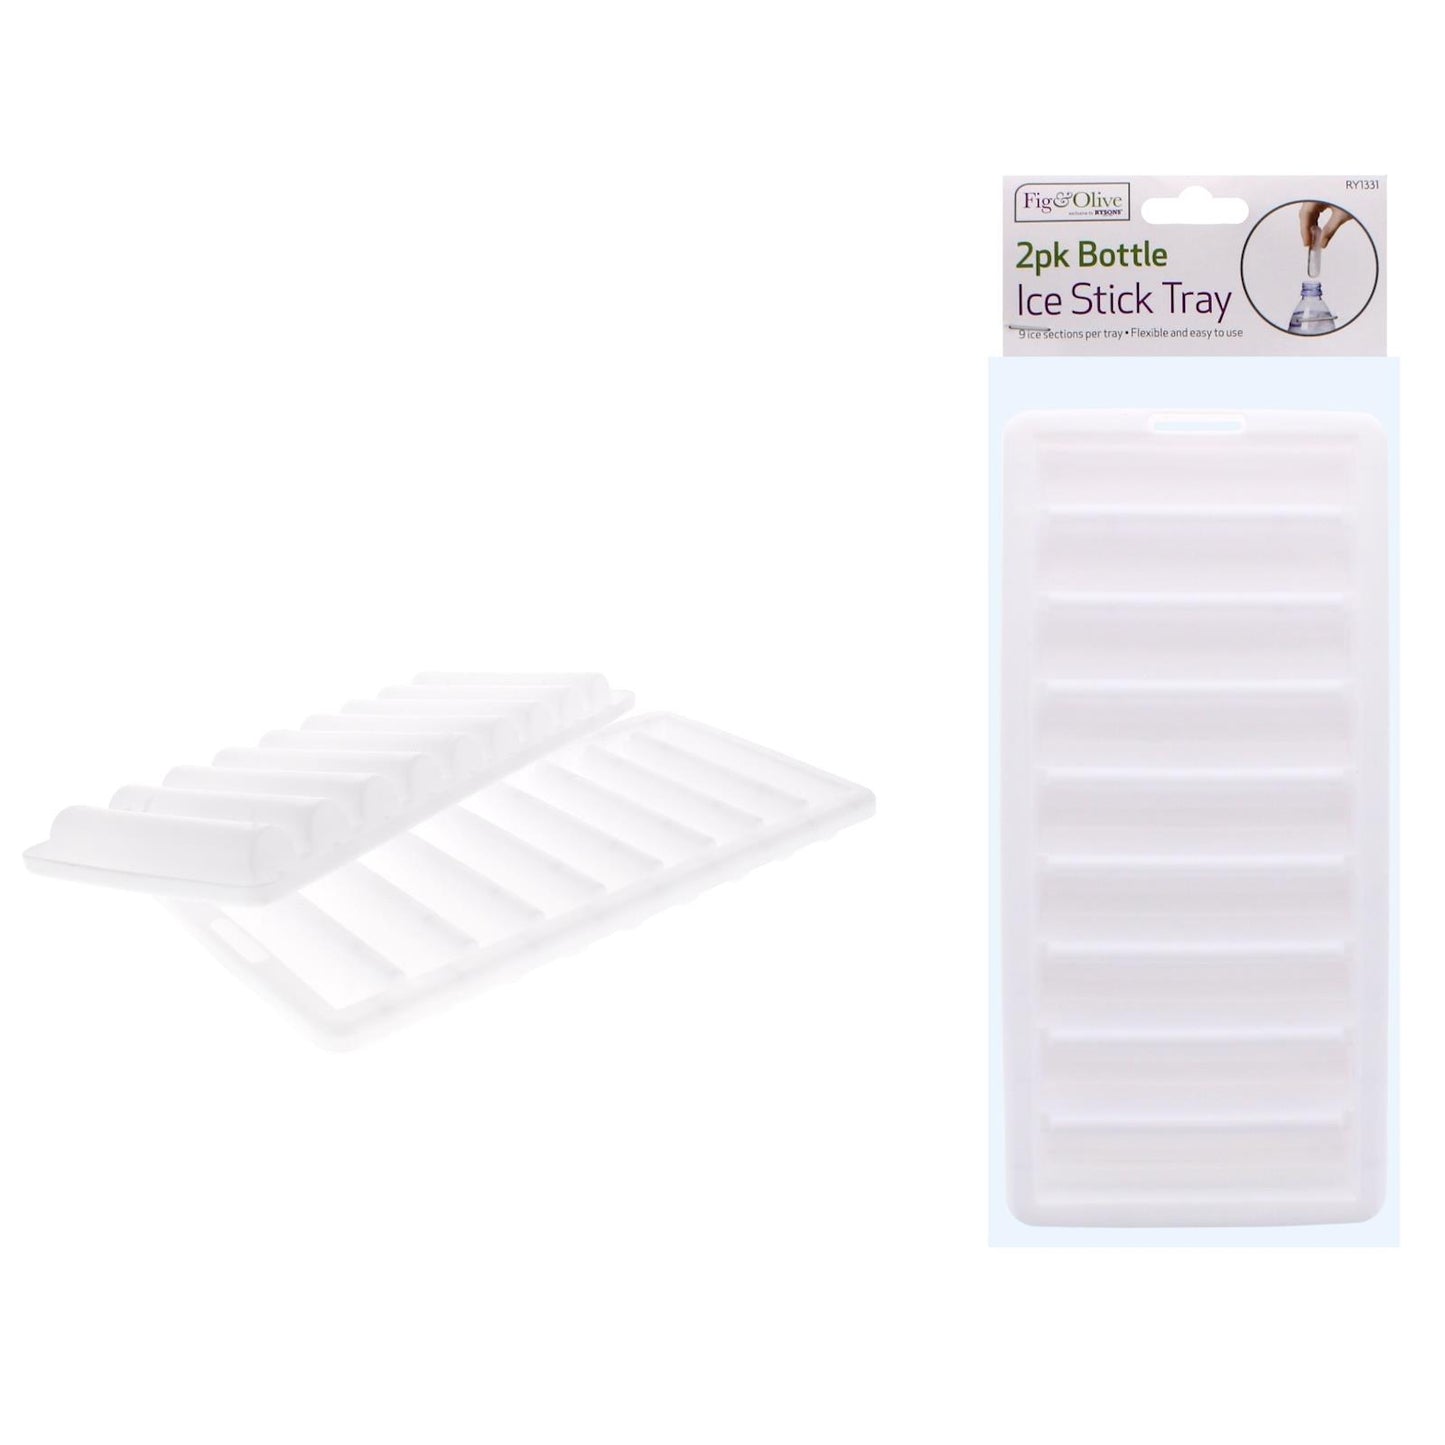 2 Pack Bottle Ice Stick Tray